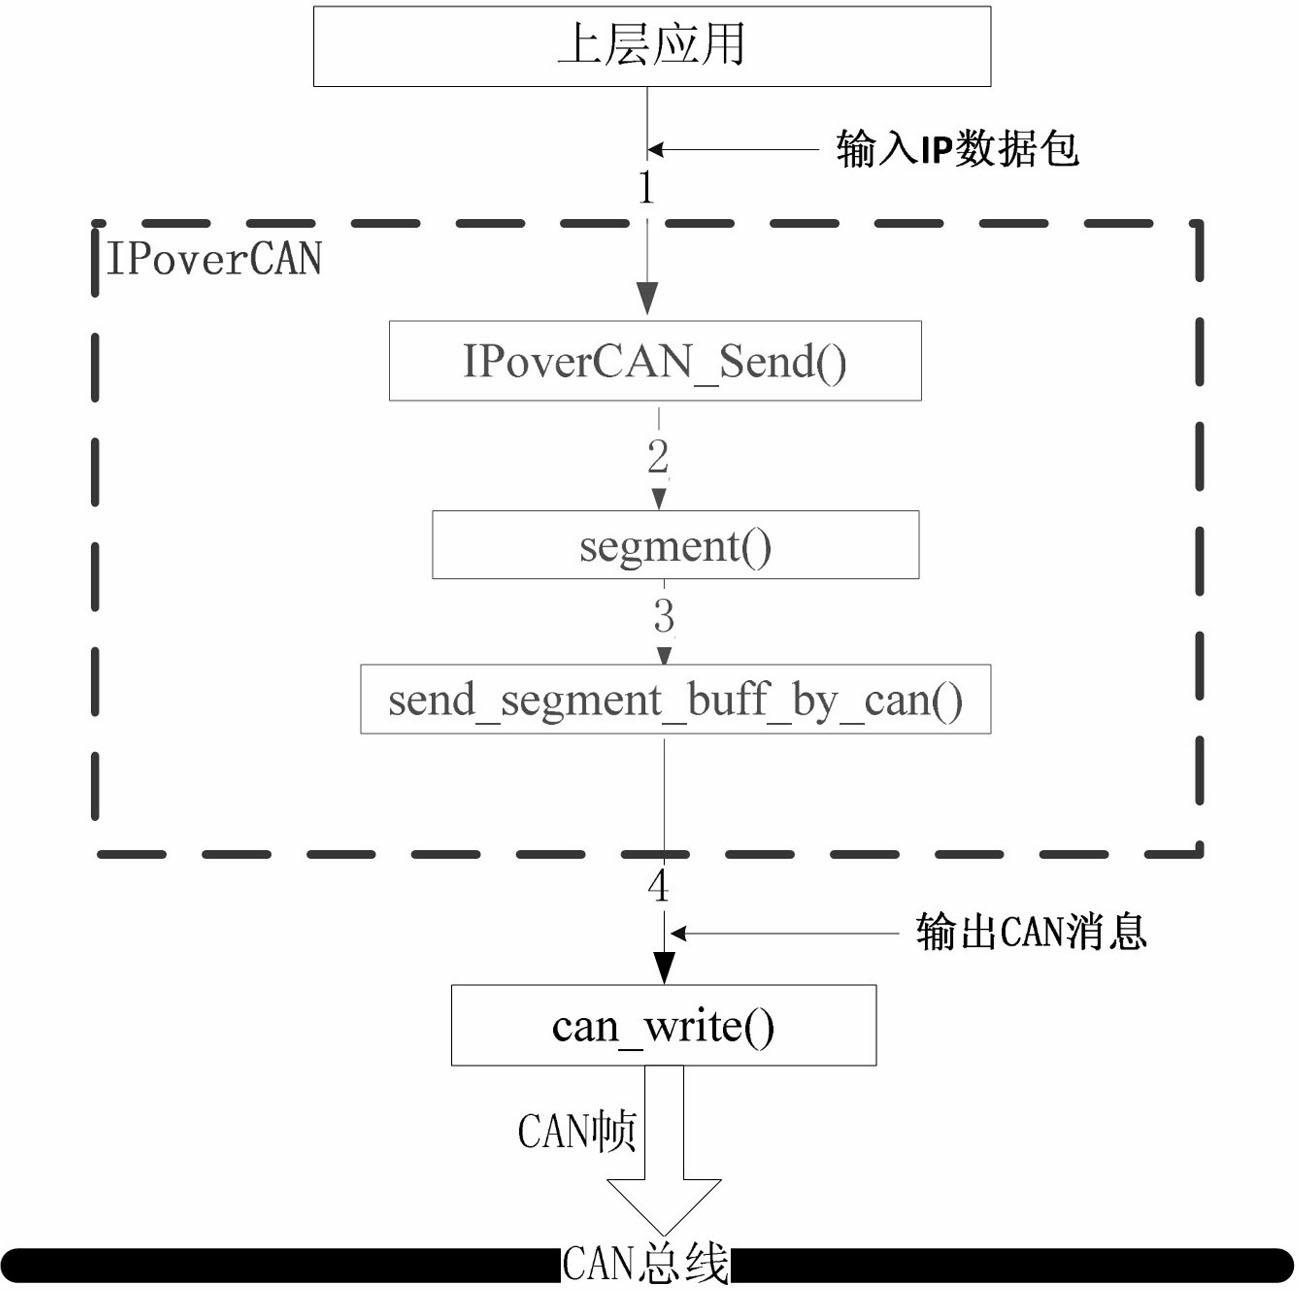 Method for converting data format between IP (Internet Protocol) data packages on CAN (Control Area Network) bus and CAN messages